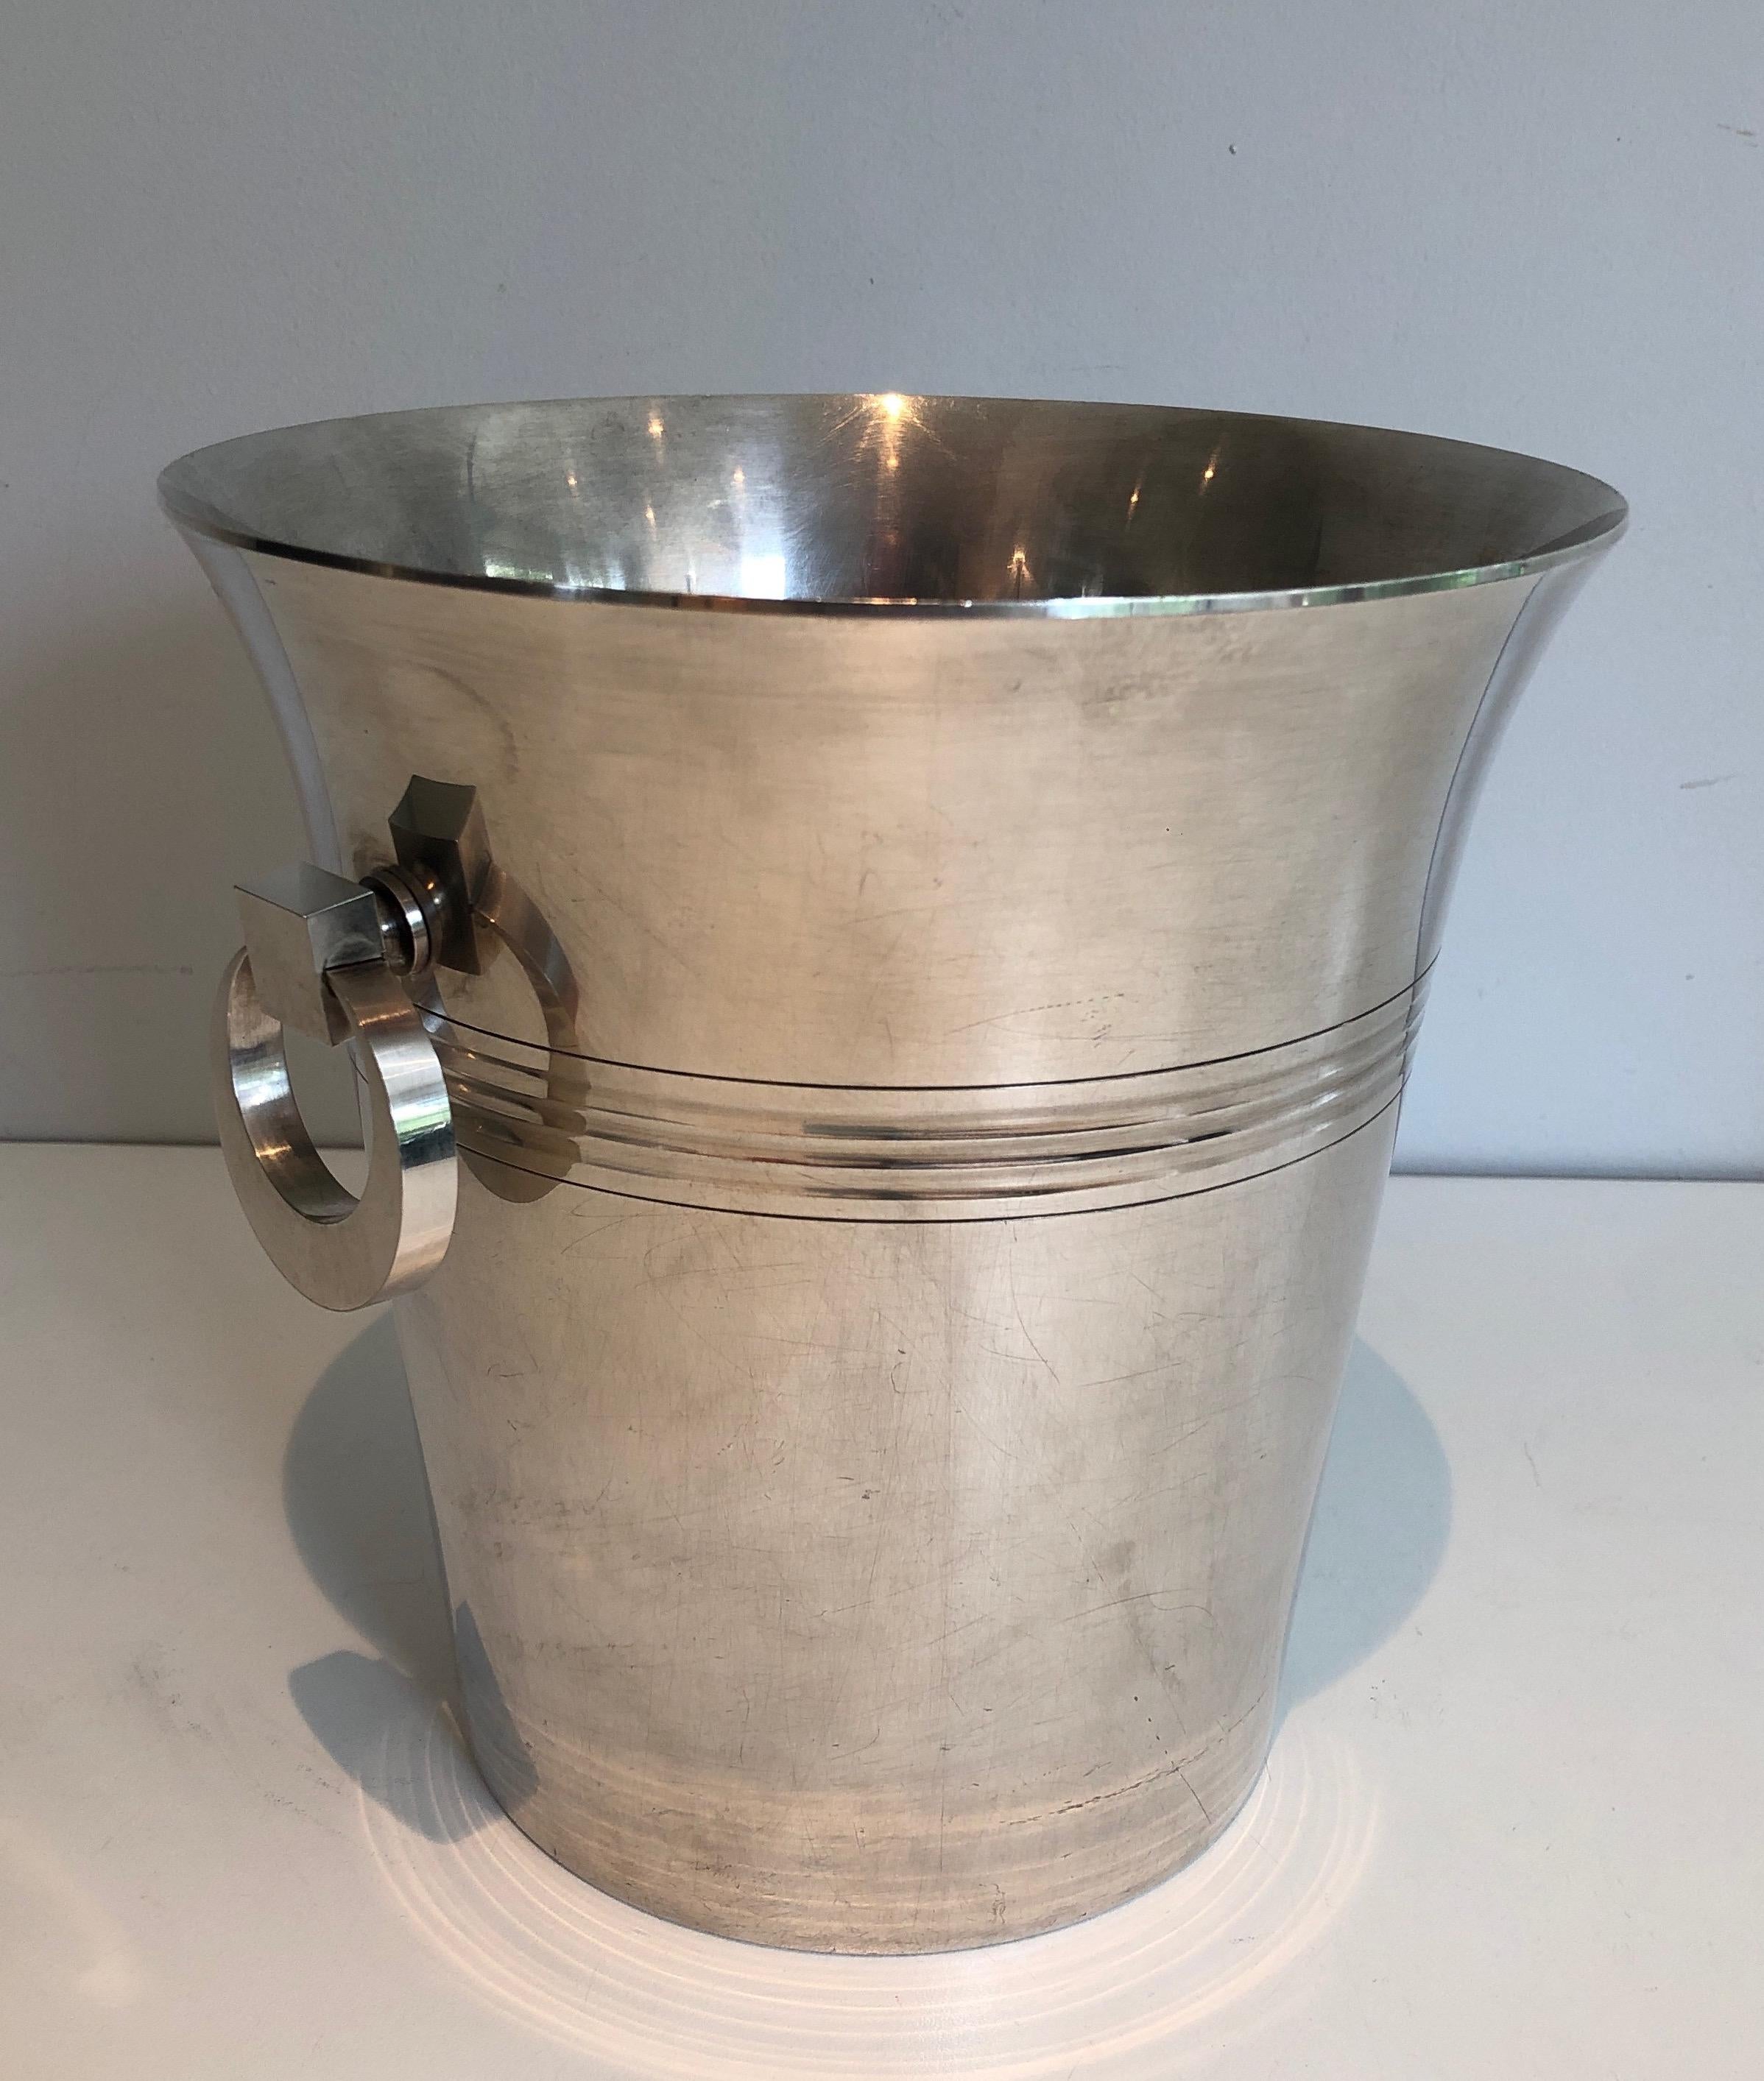 Mid-20th Century Silver Plated Champagne Bucket, Art Deco Period French Work Marked, circa 1930 For Sale